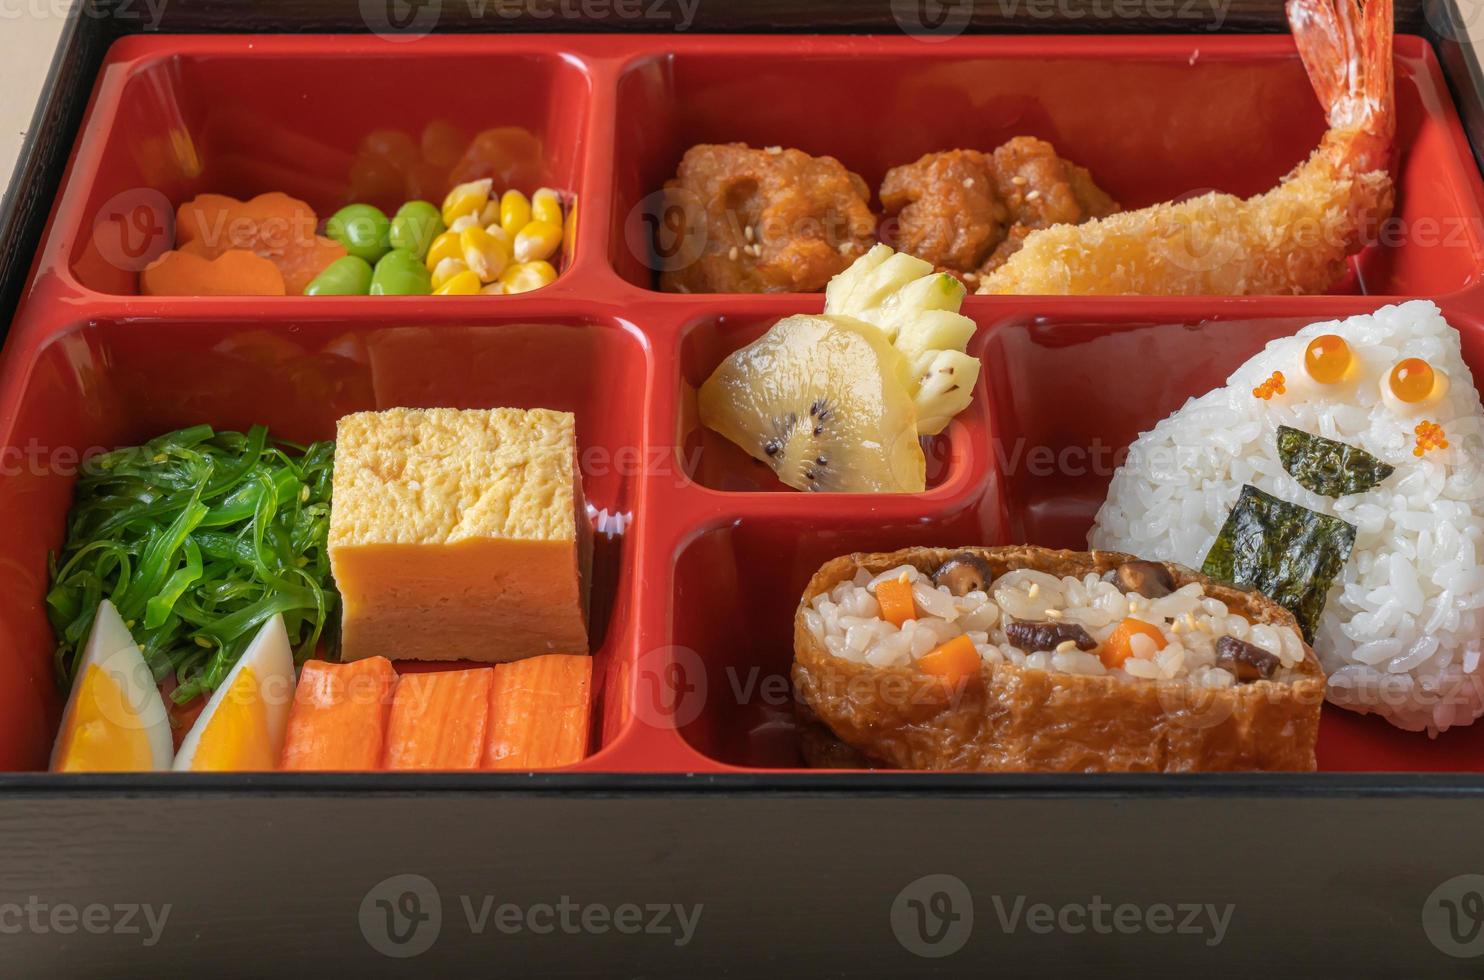 Inari sushi rice wrapped in dried tofu with fried shrimp and fried chicken in bento set - Japanese food style photo